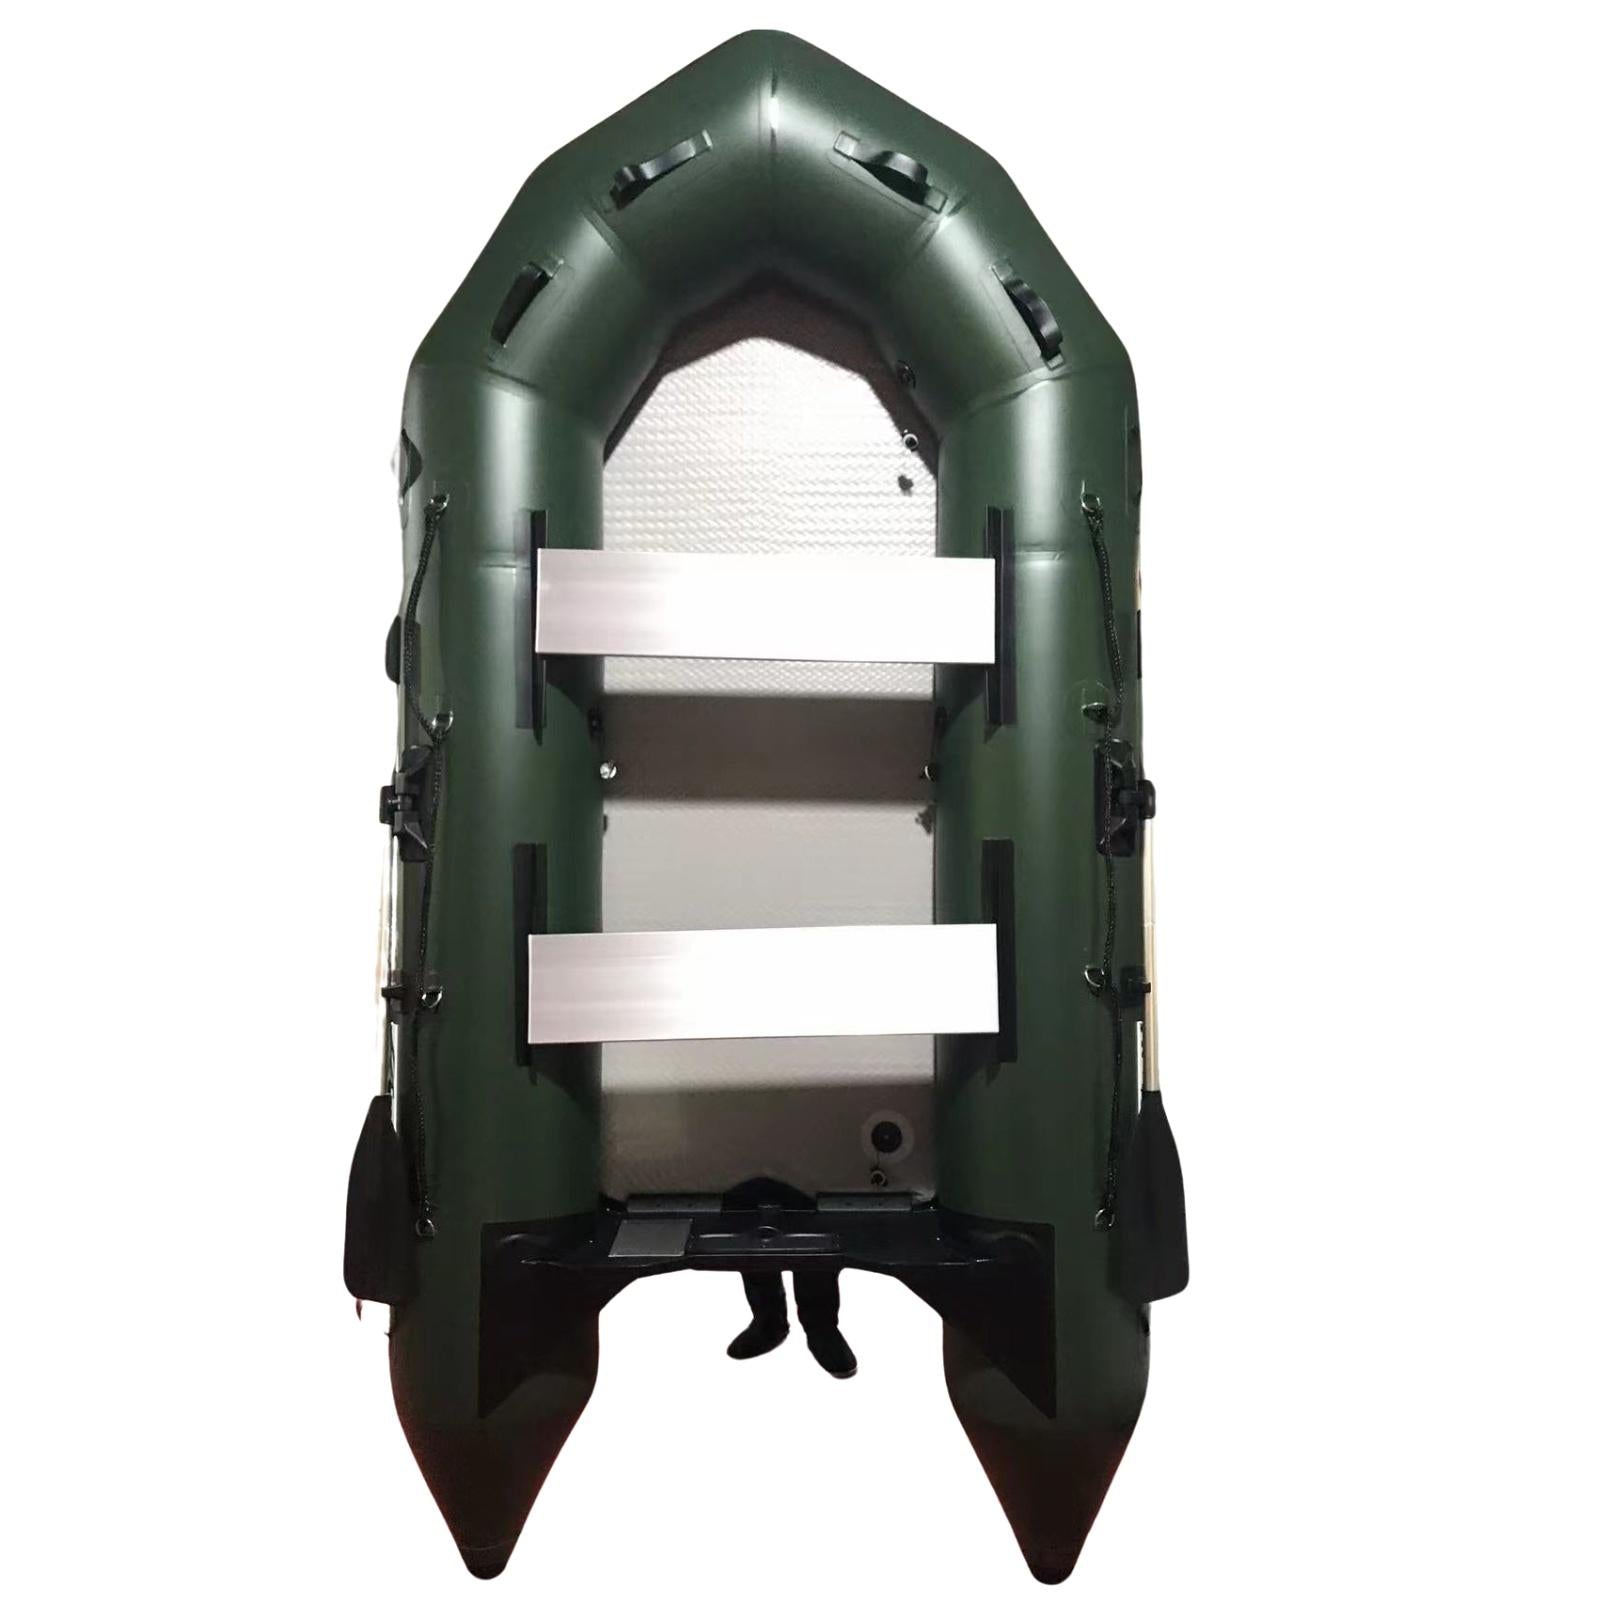 2.3M ( Green ) Inflatable Boat Dinghy Tender Pontoon Rescue & Dive Boat Fishing Boat With Hard Air-Deck Floor